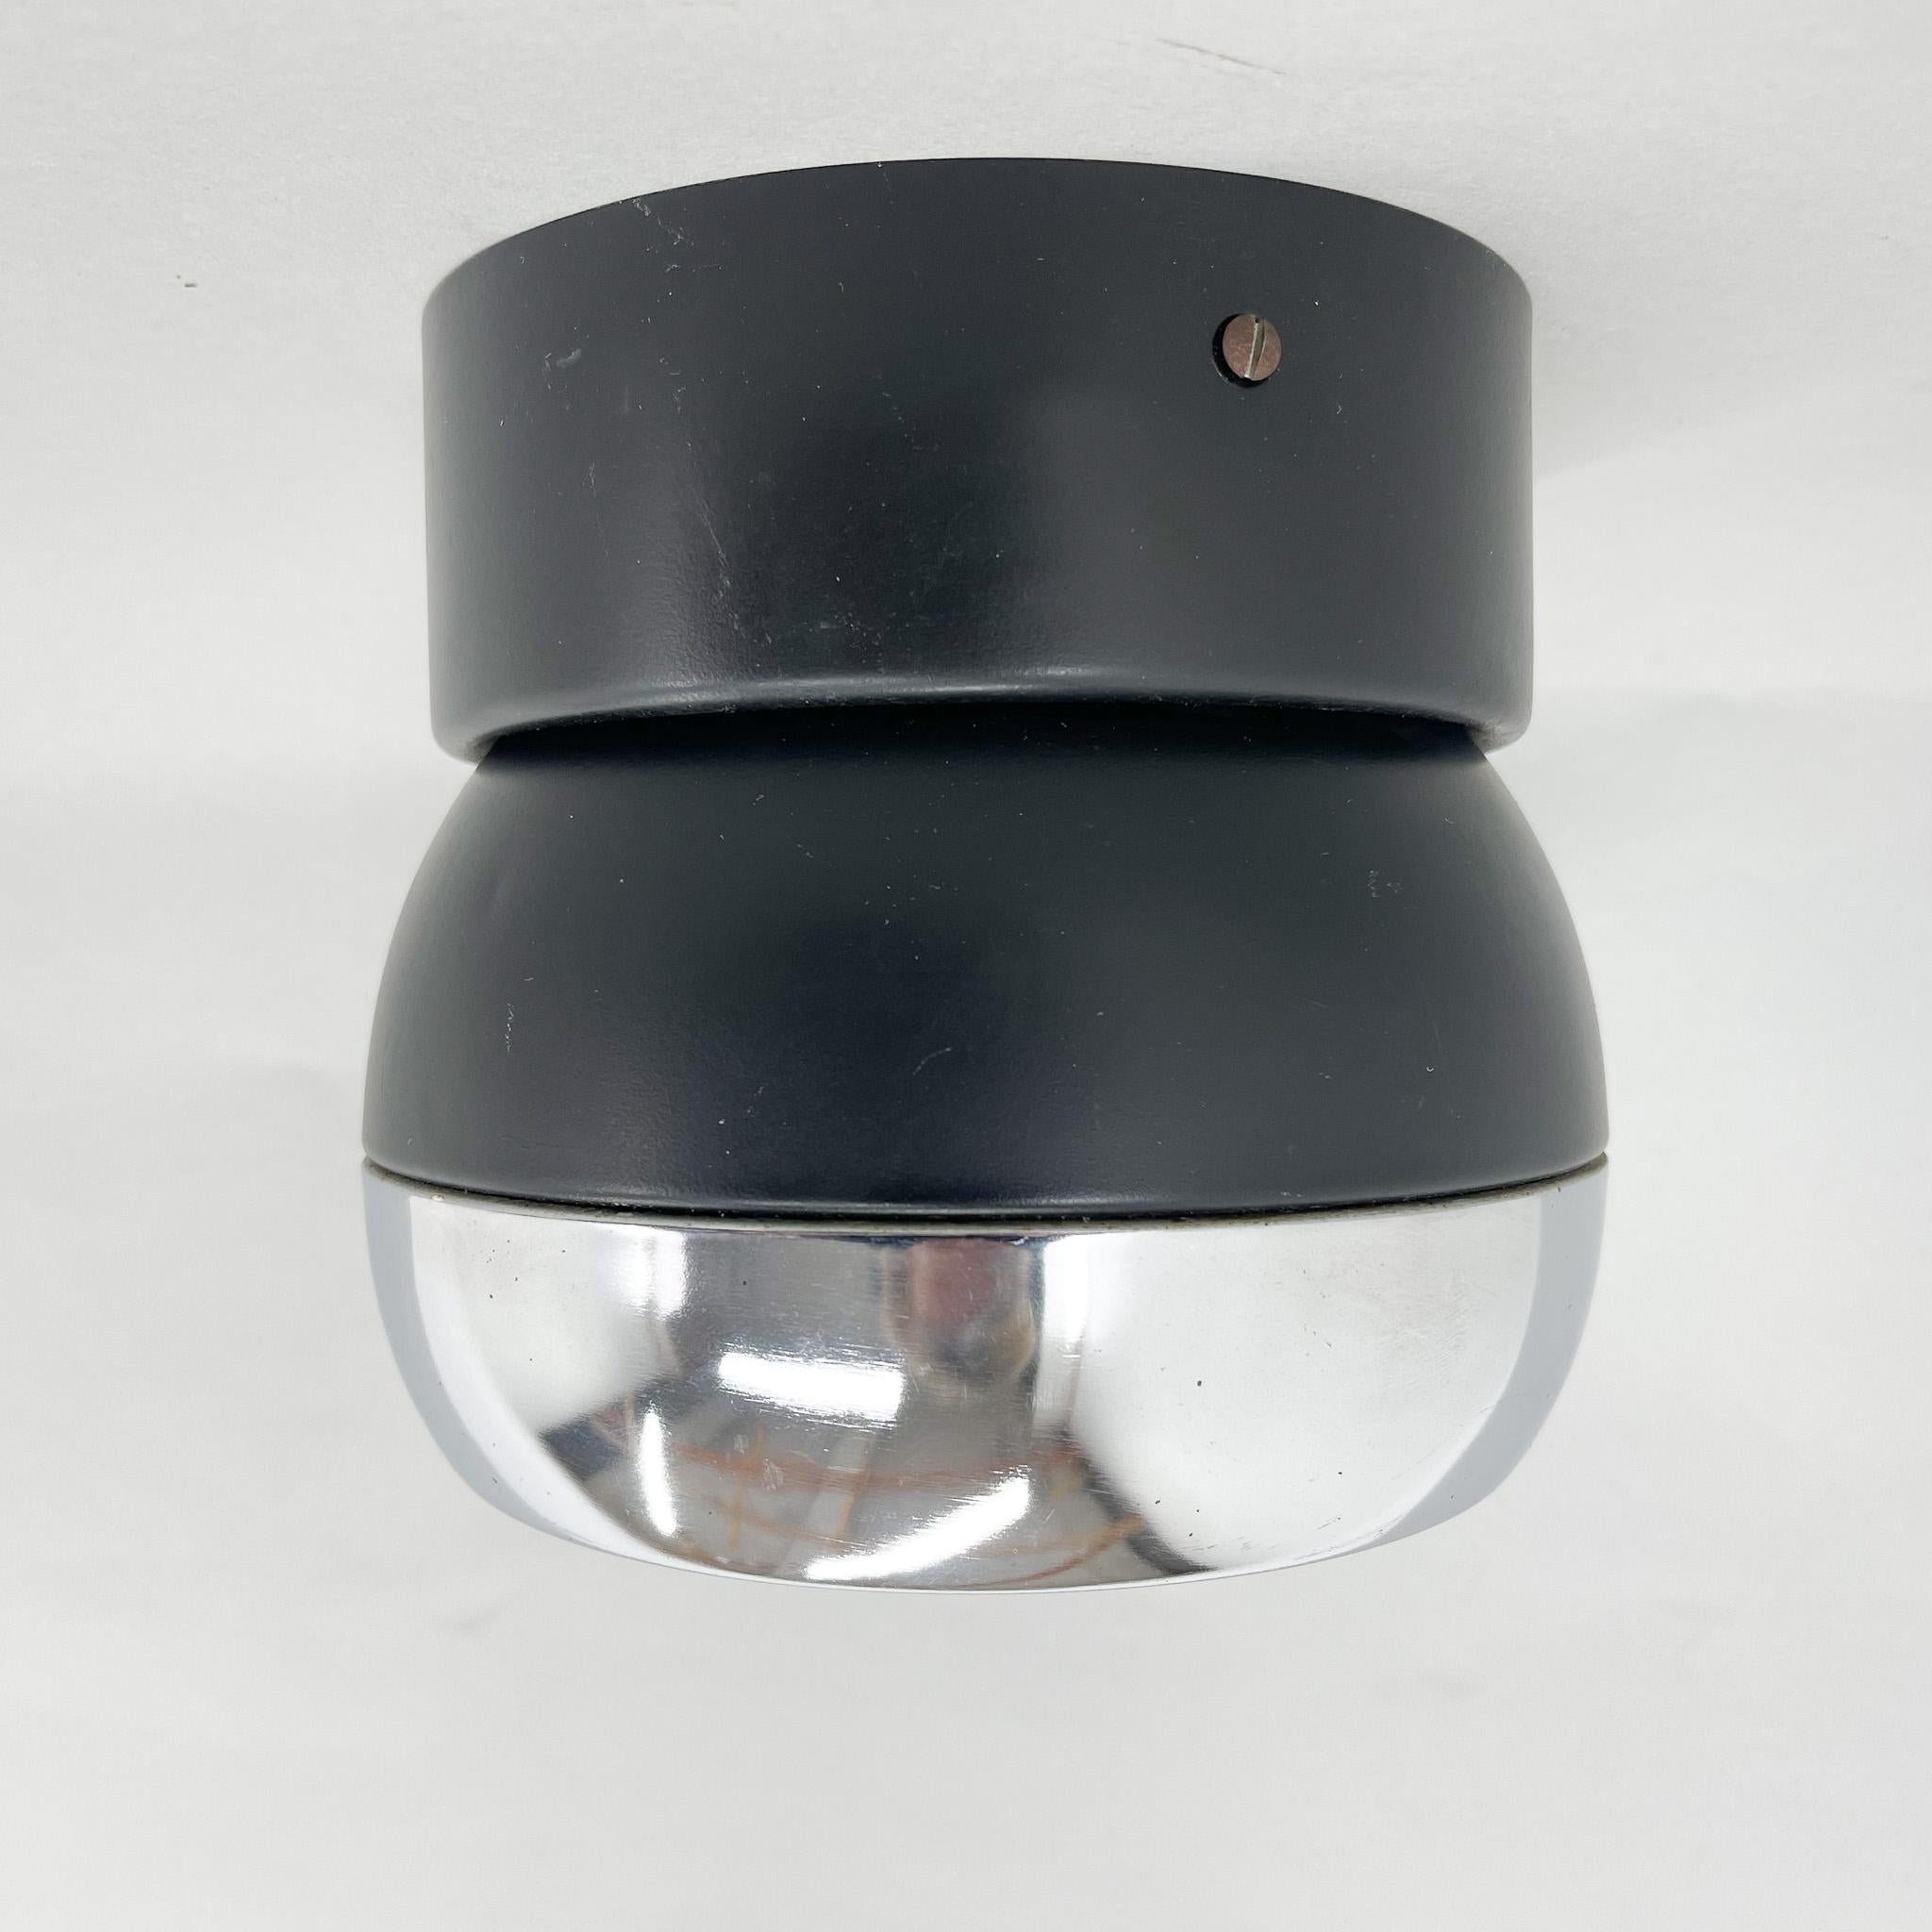 Vintage ceiling or wall light made of metal with chrome rim. Moves in on direction. Made in former Czechoslovakia by the famous Napako in the 1980s.